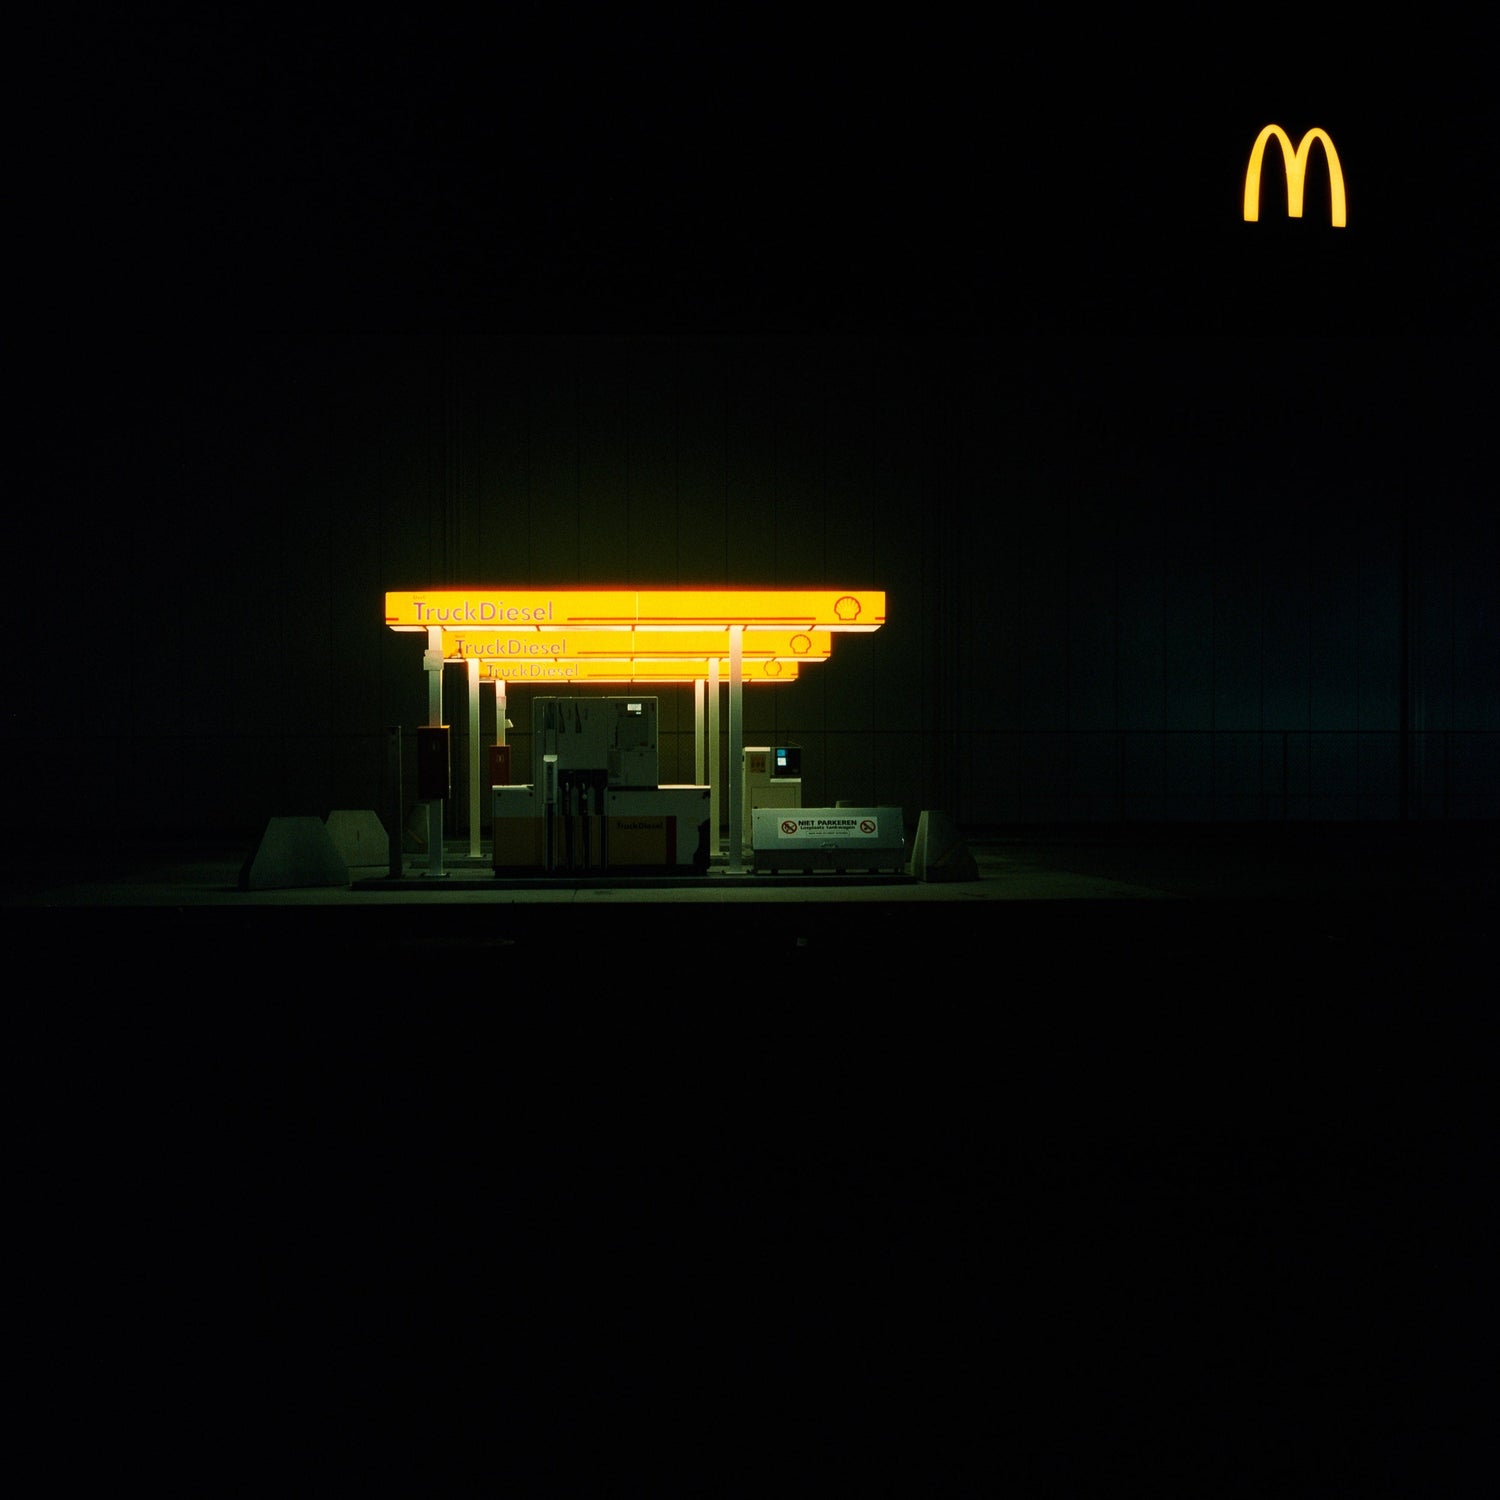 The artwork 'Exterior #9' by Jildo Tim Hof displaying a truck gas station lit up by bright yellow lights against a dark sky